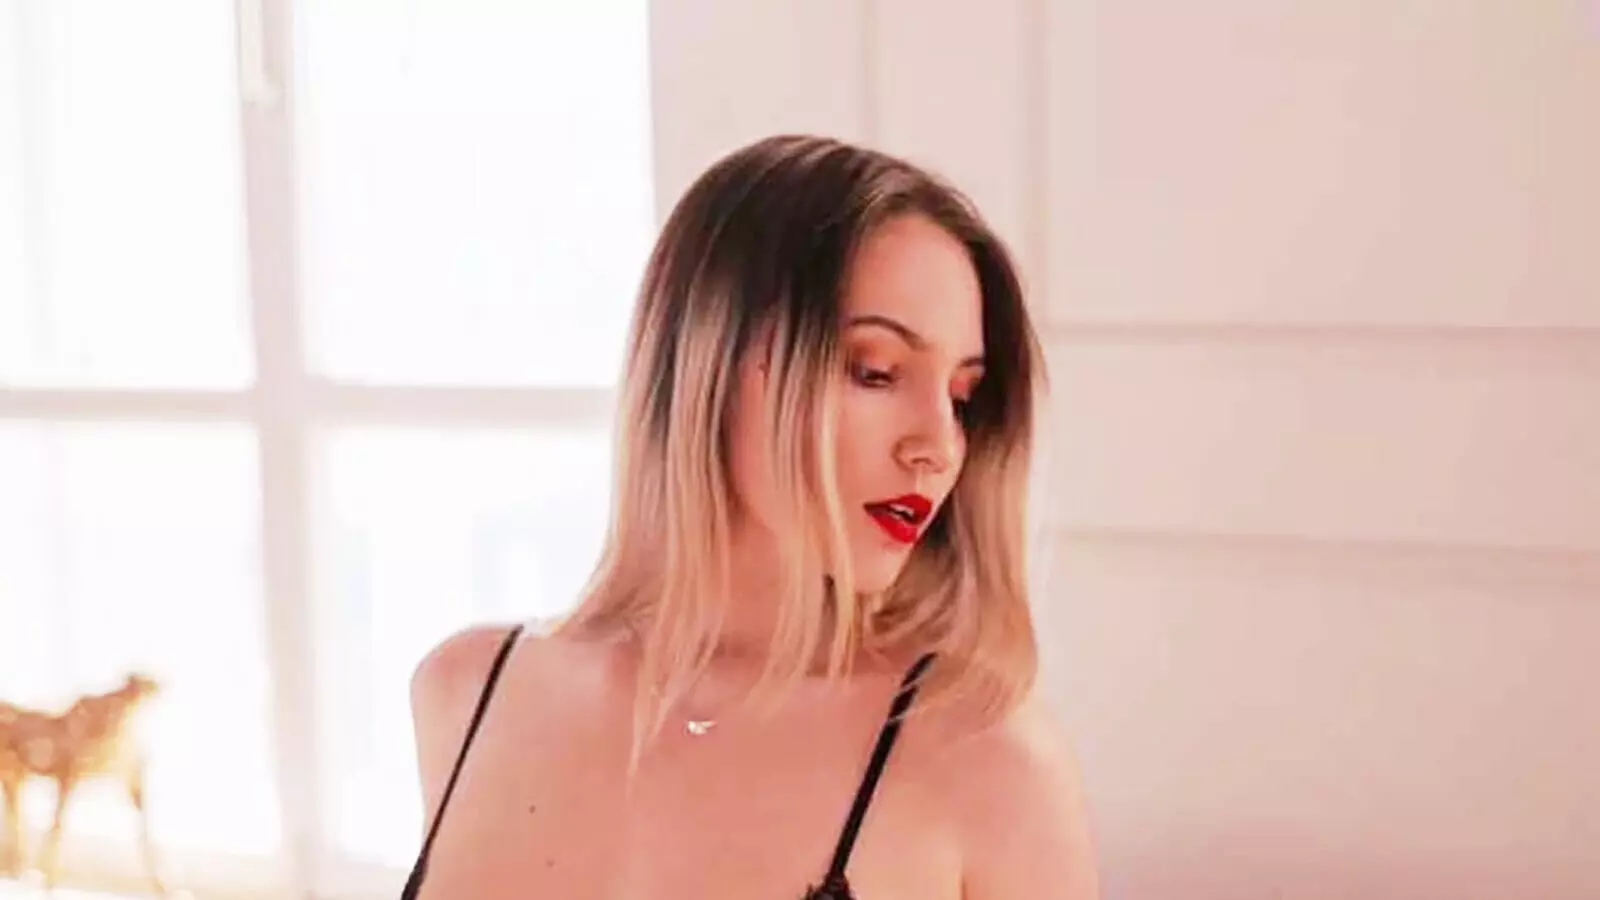  RELATED VIDEOS - WEBCAM LanaHolland STRIPS AND MASTURBATES